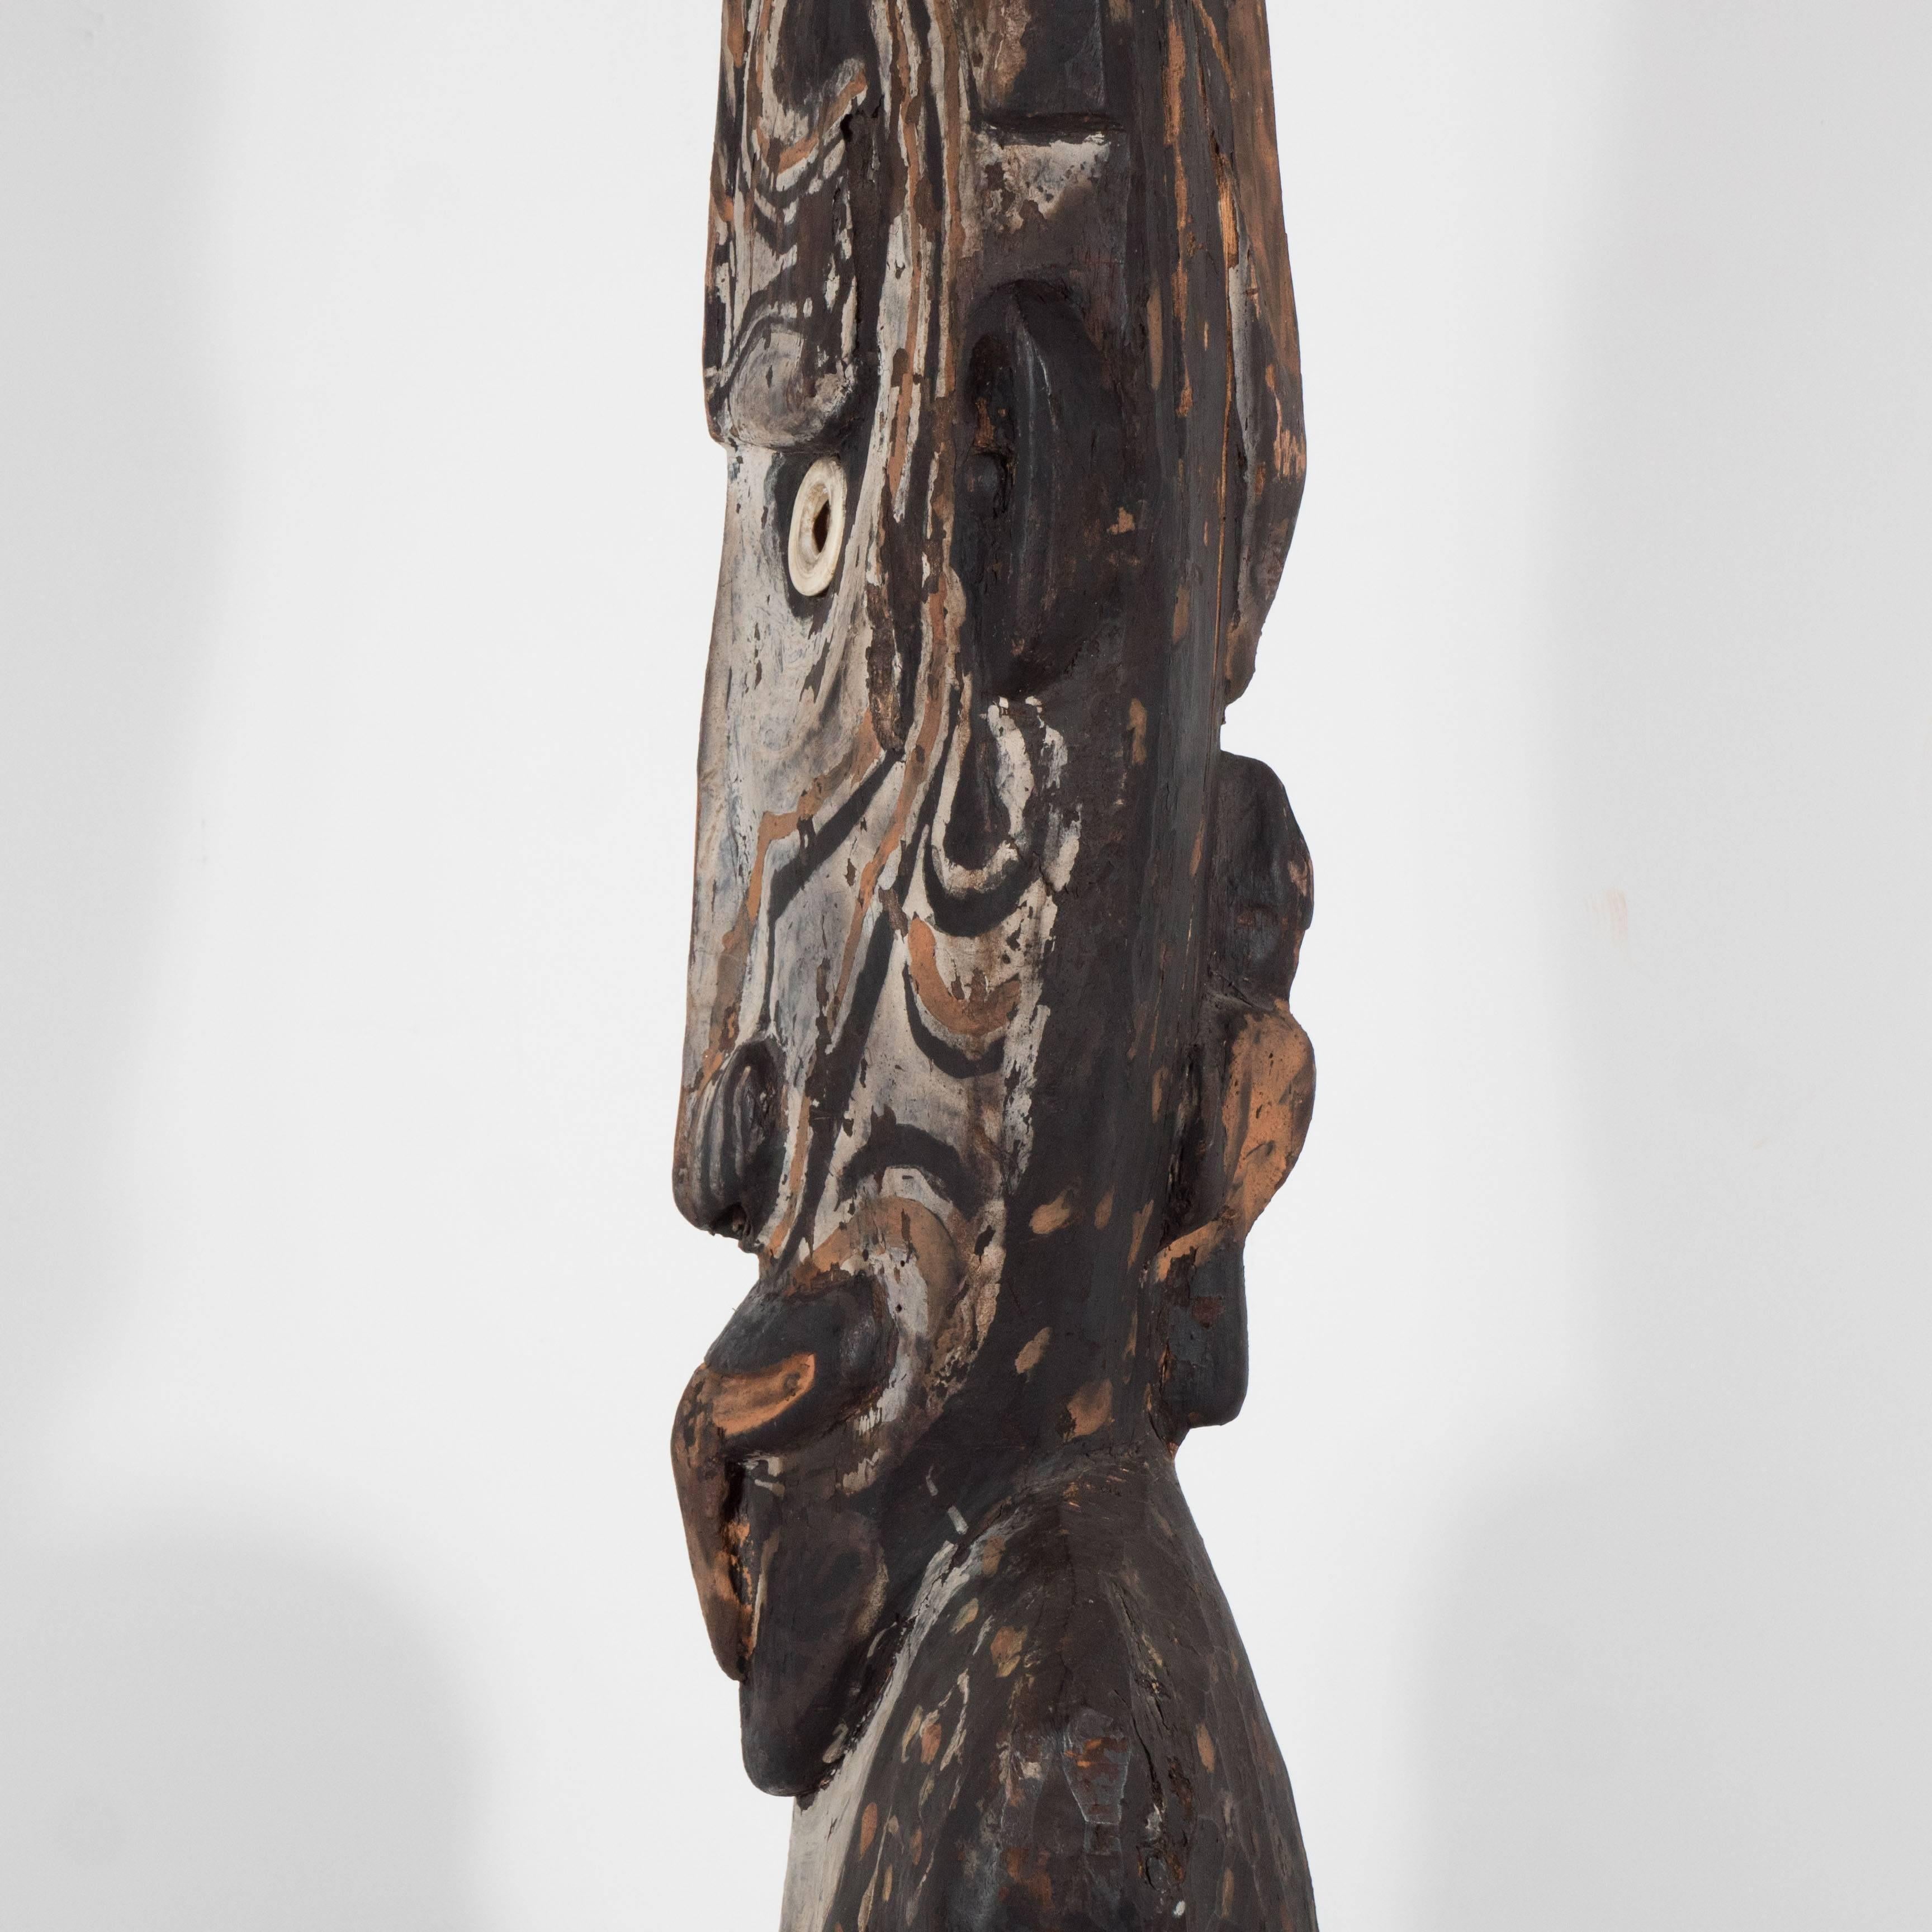 Large Carved and Painted Wood Spirit Figure Papua New Guinea, Late 19th Century - Tribal Sculpture by Unknown